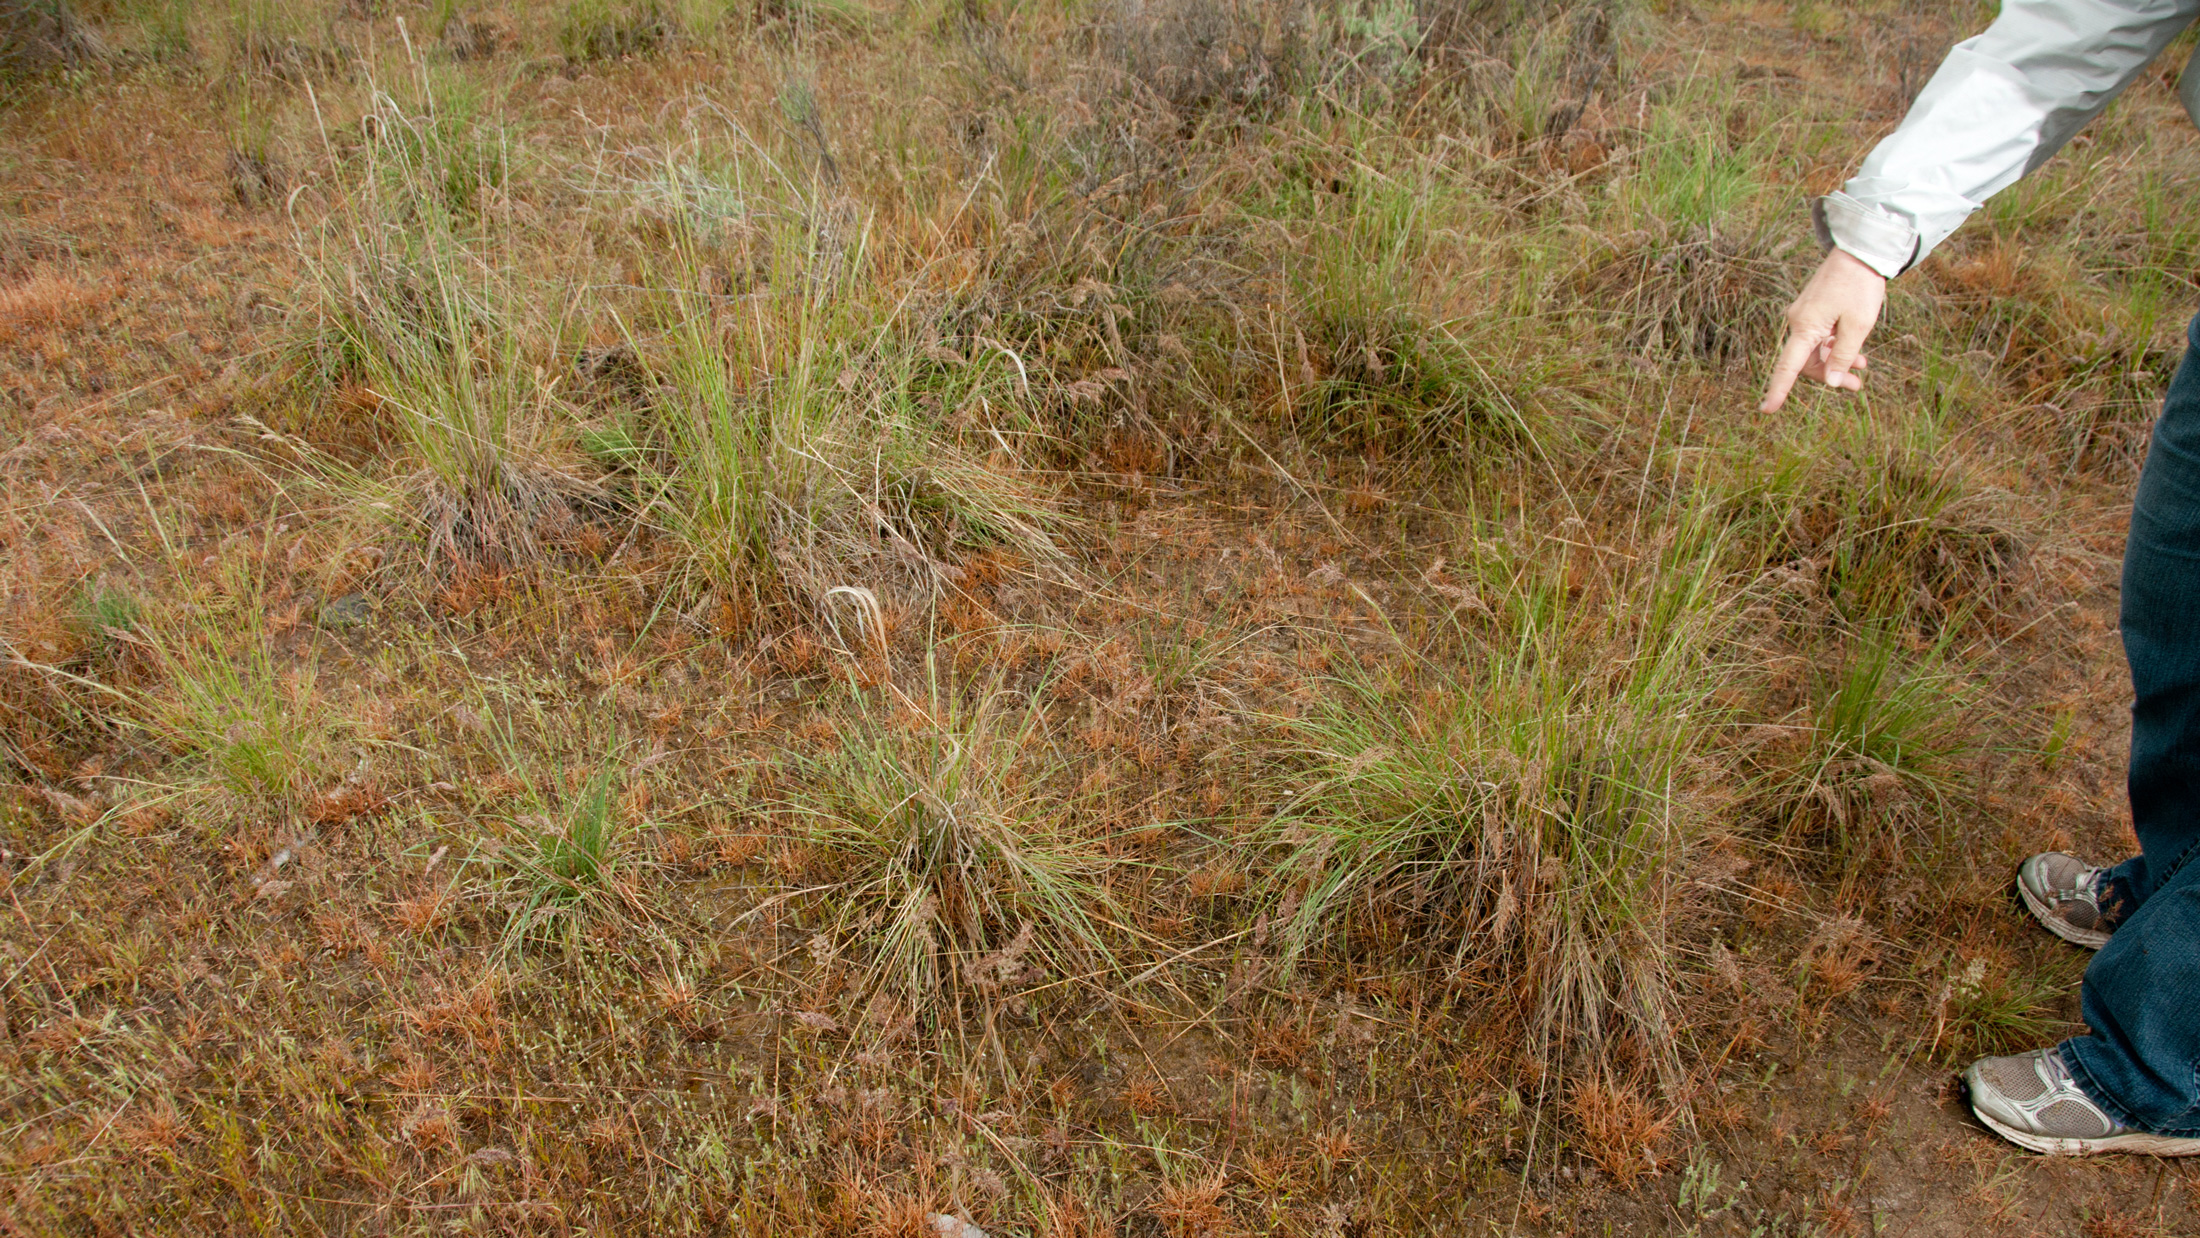 A patch of land on Dixie Dringham's property where the D7 biocontrol has taken effect, allowing native grasses to grow back. Prior to treatment this was all cheatgrass. Photo © Hannah Letinich